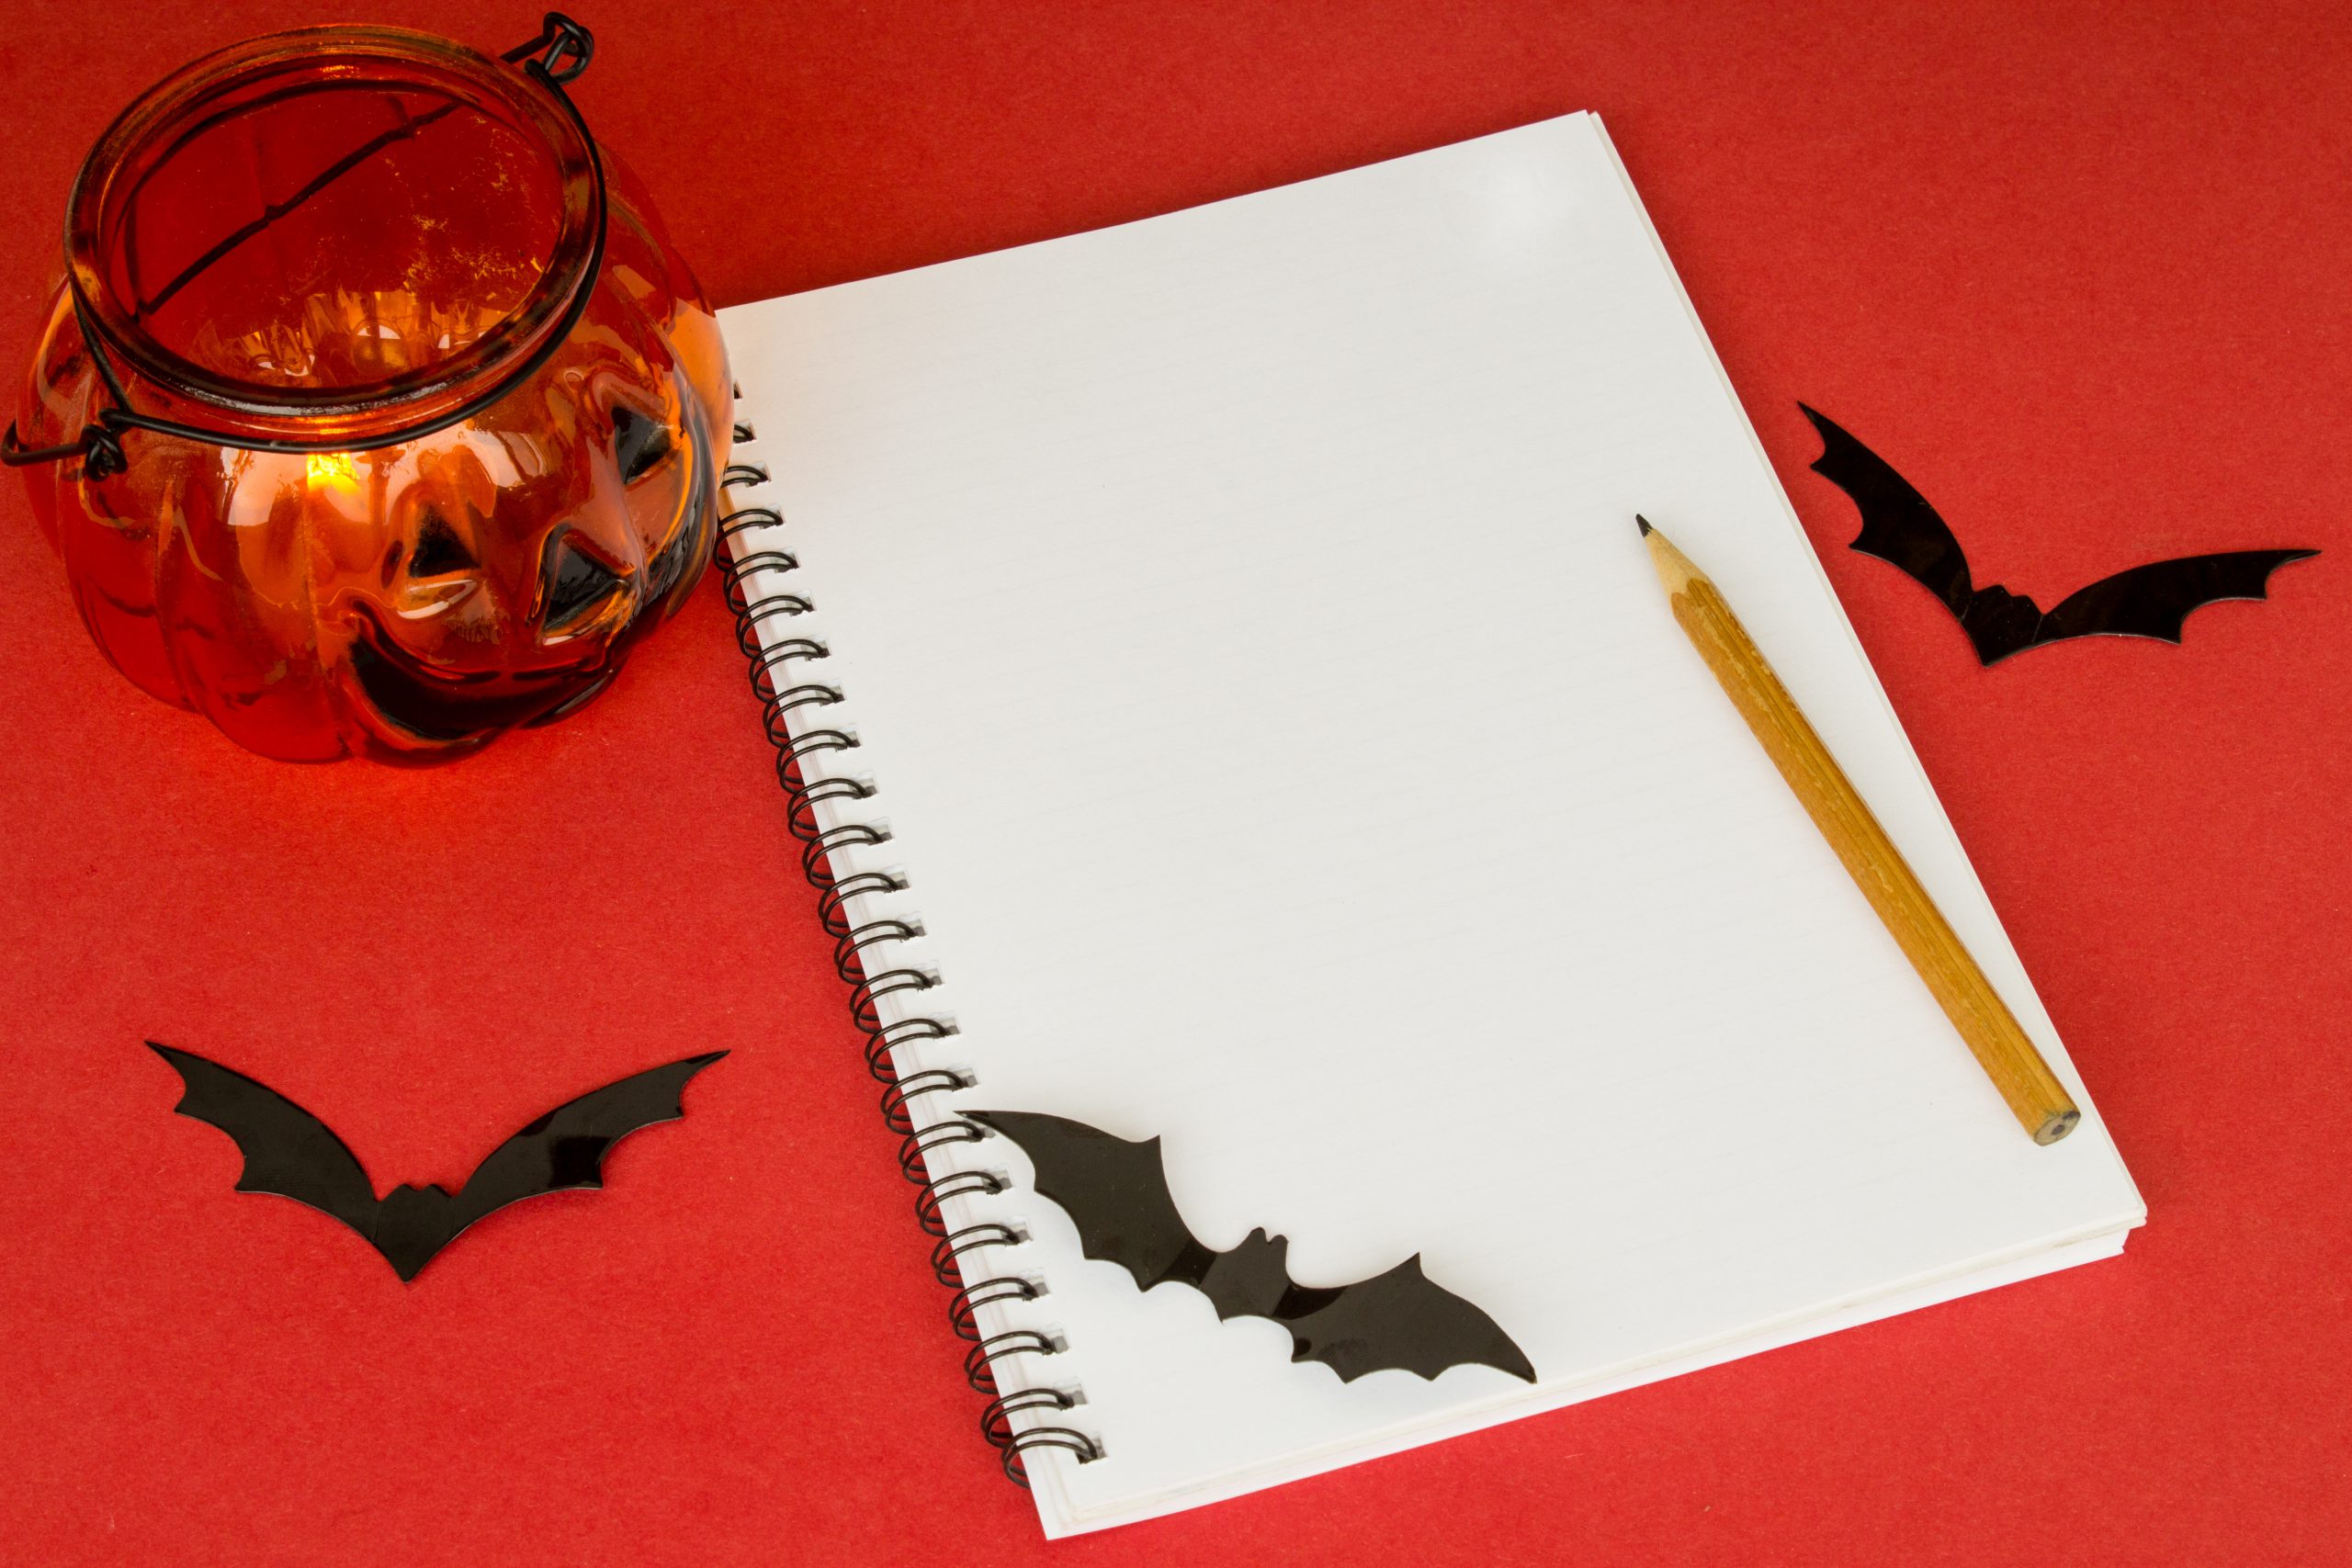 Halloween notepad. Pumpkin lantern, pen, bats and notepad on a red background. Traditional halloween decor concept. Copy space. Flatlay. Top view.